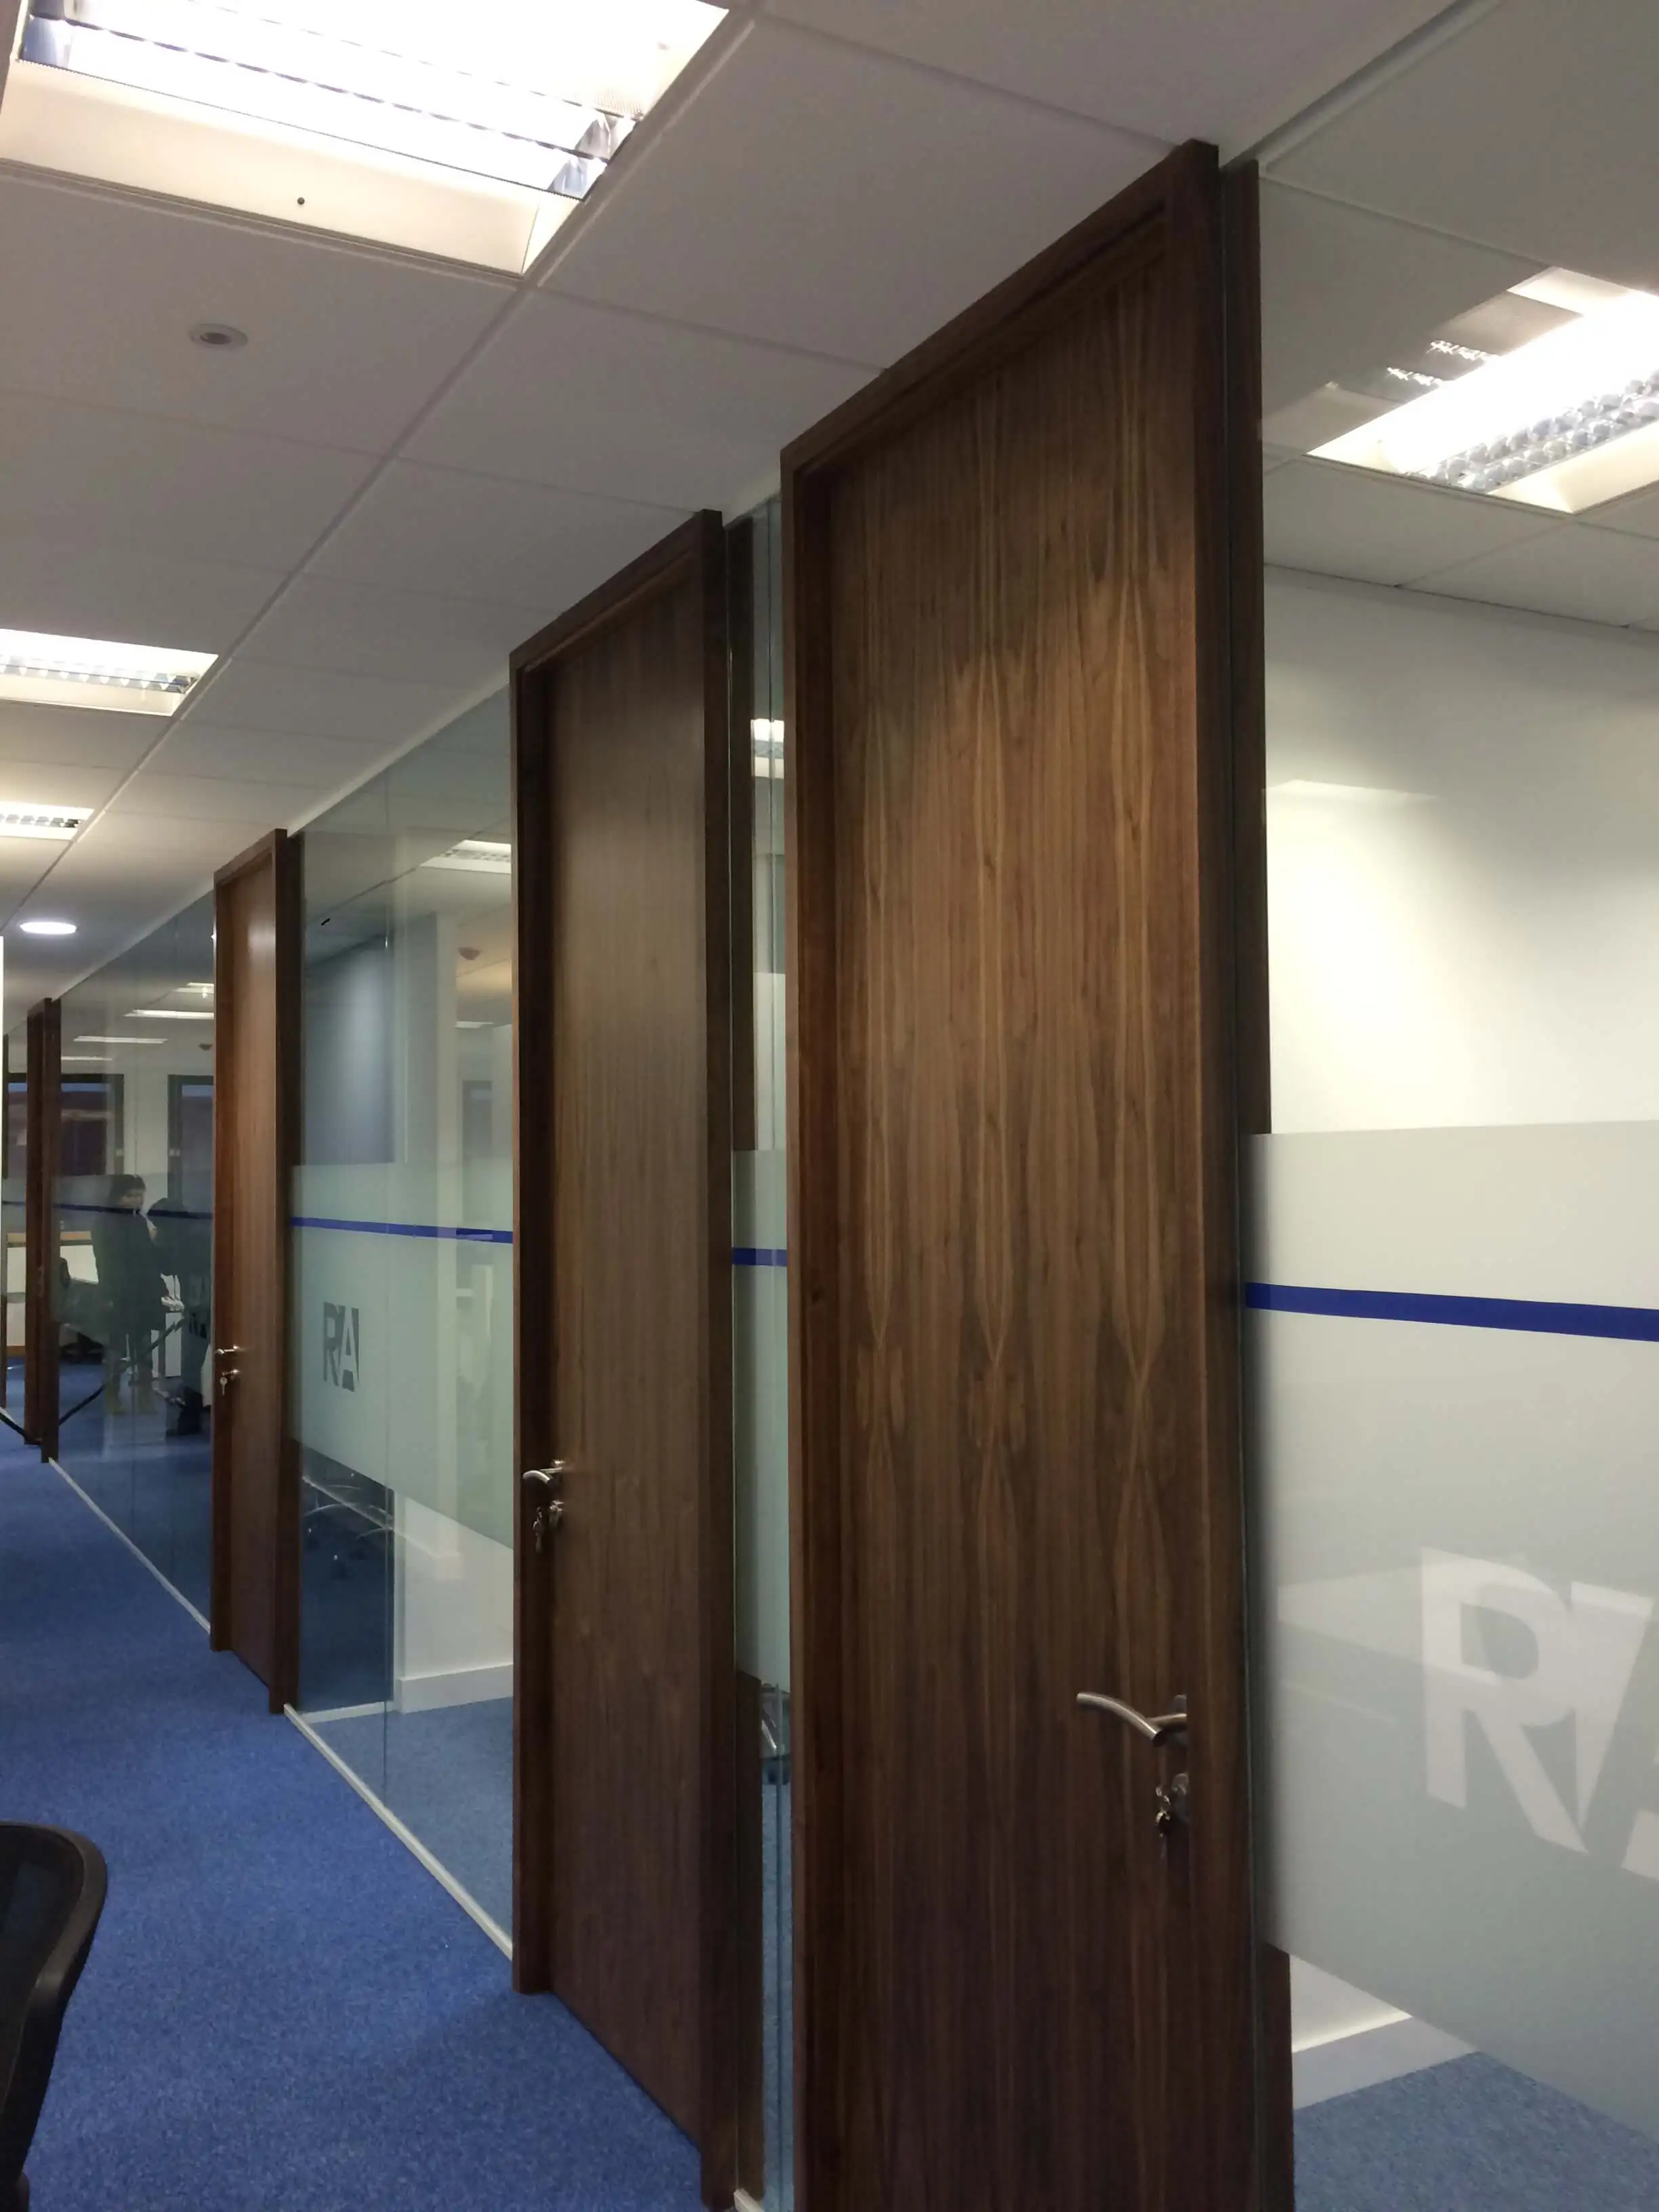 Gadd House office spaces with glass partitions with solid doors